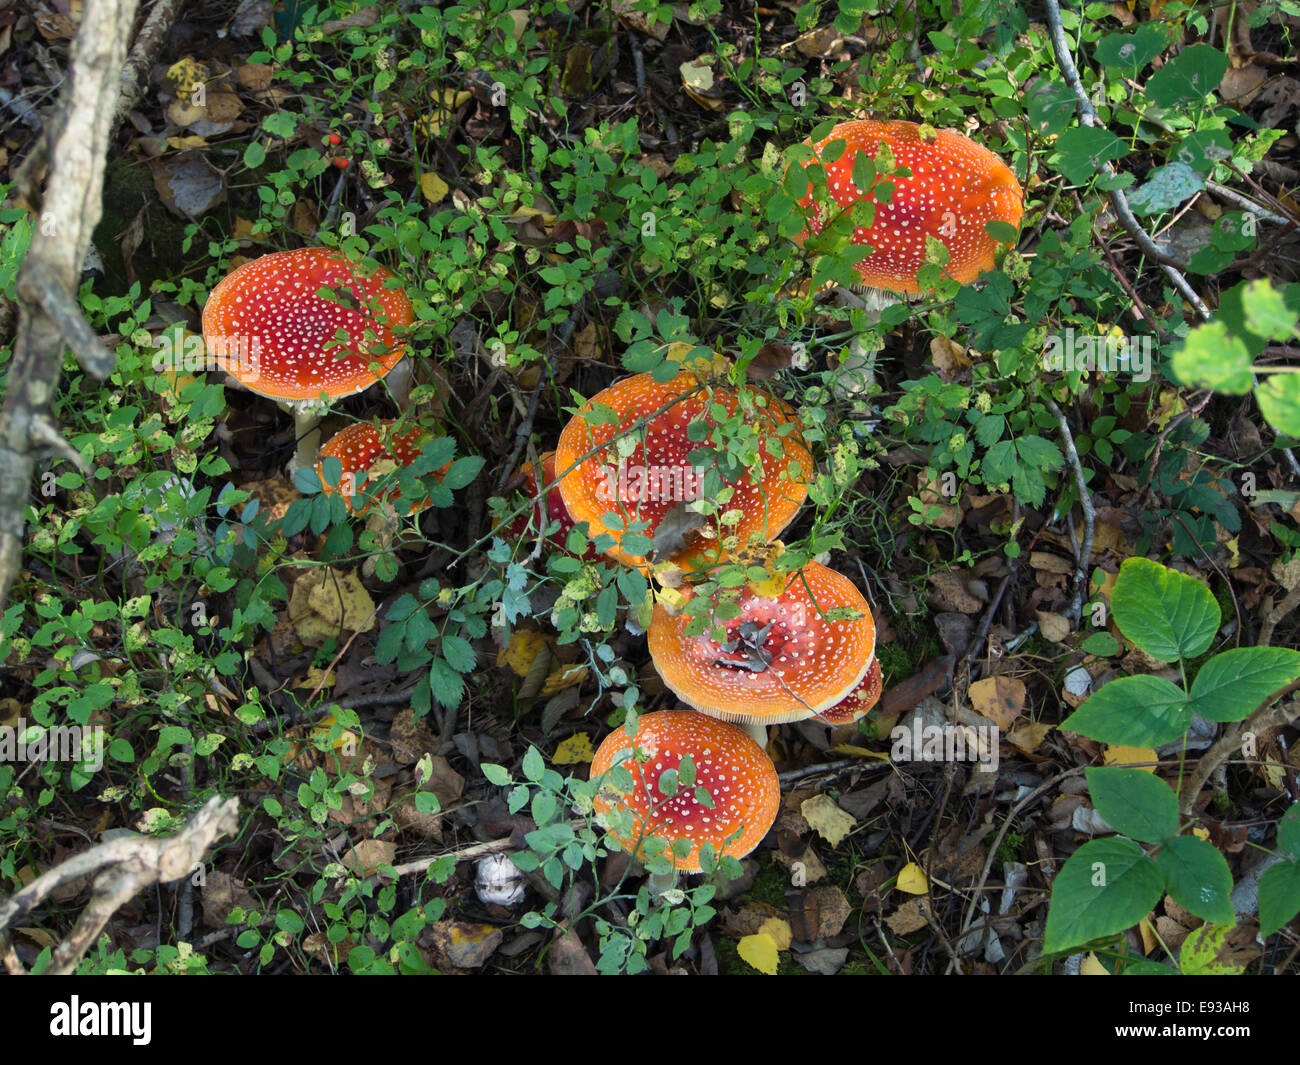 Hats of fly agaric or fly amanita, Amanita muscaria, lighting up a forest floor in Nordmarka Oslo Norway Stock Photo